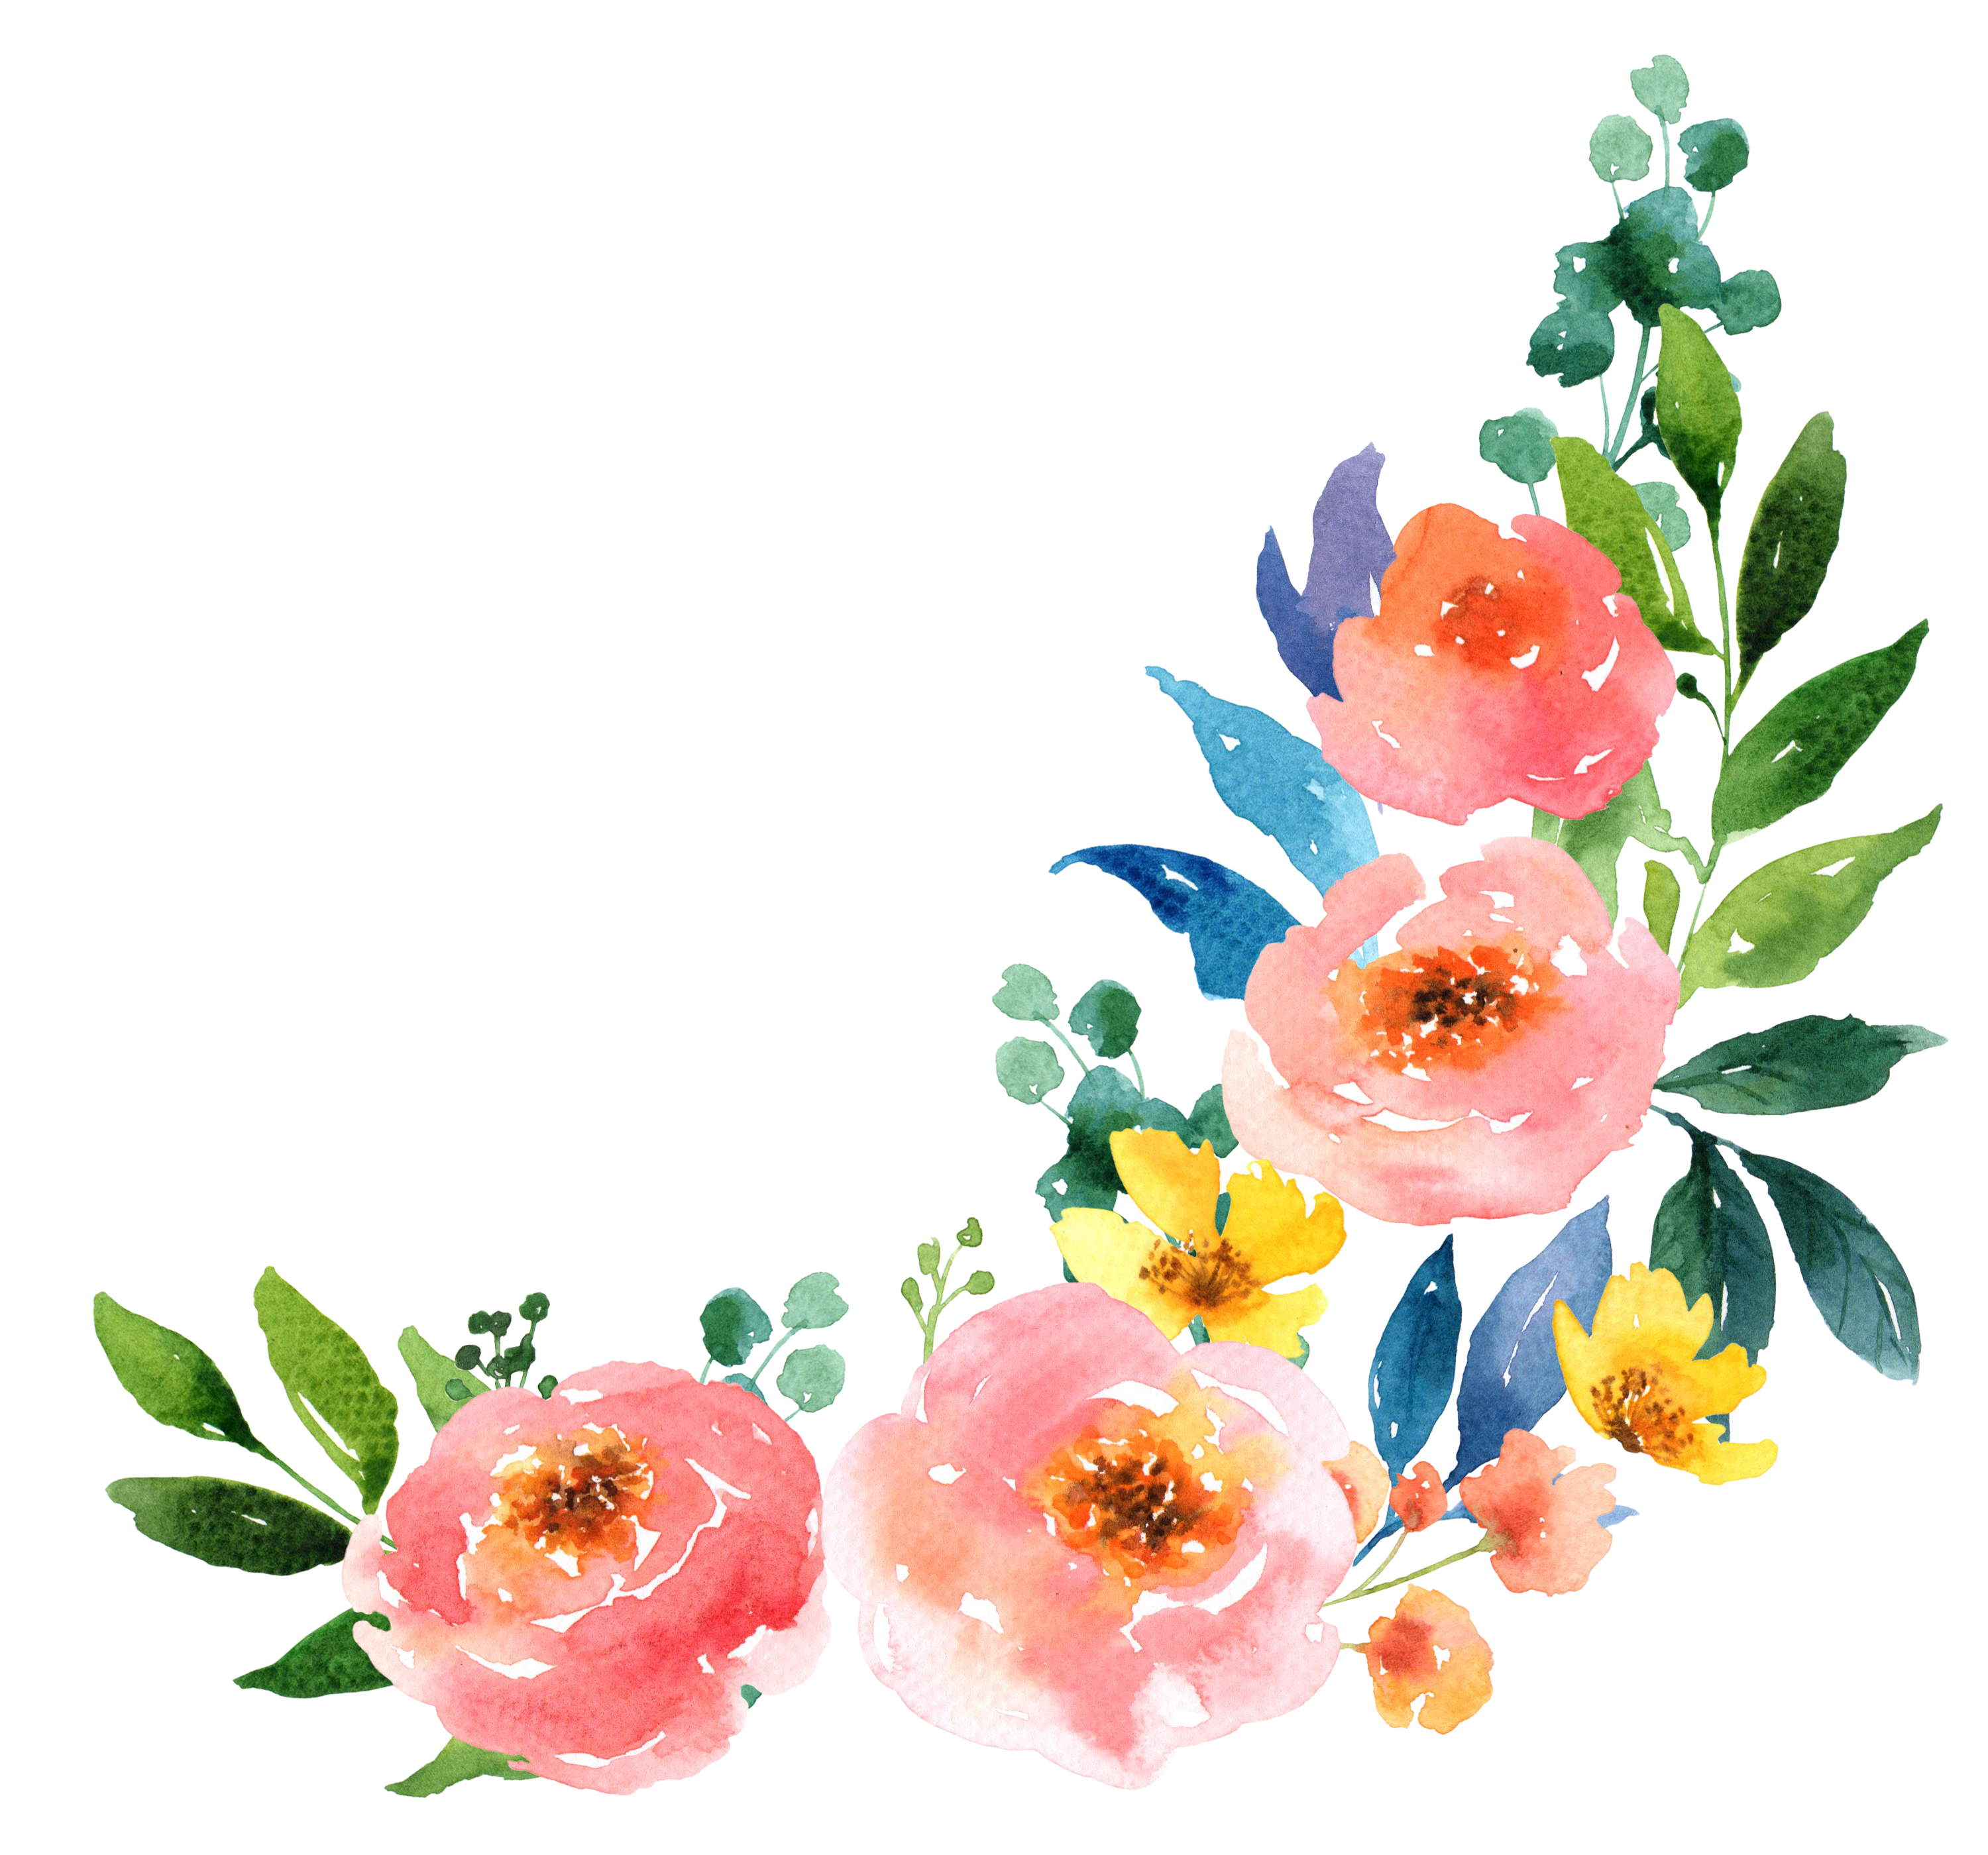 Download Transparent Background Watercolor Flowers Png | PNG & GIF BASE